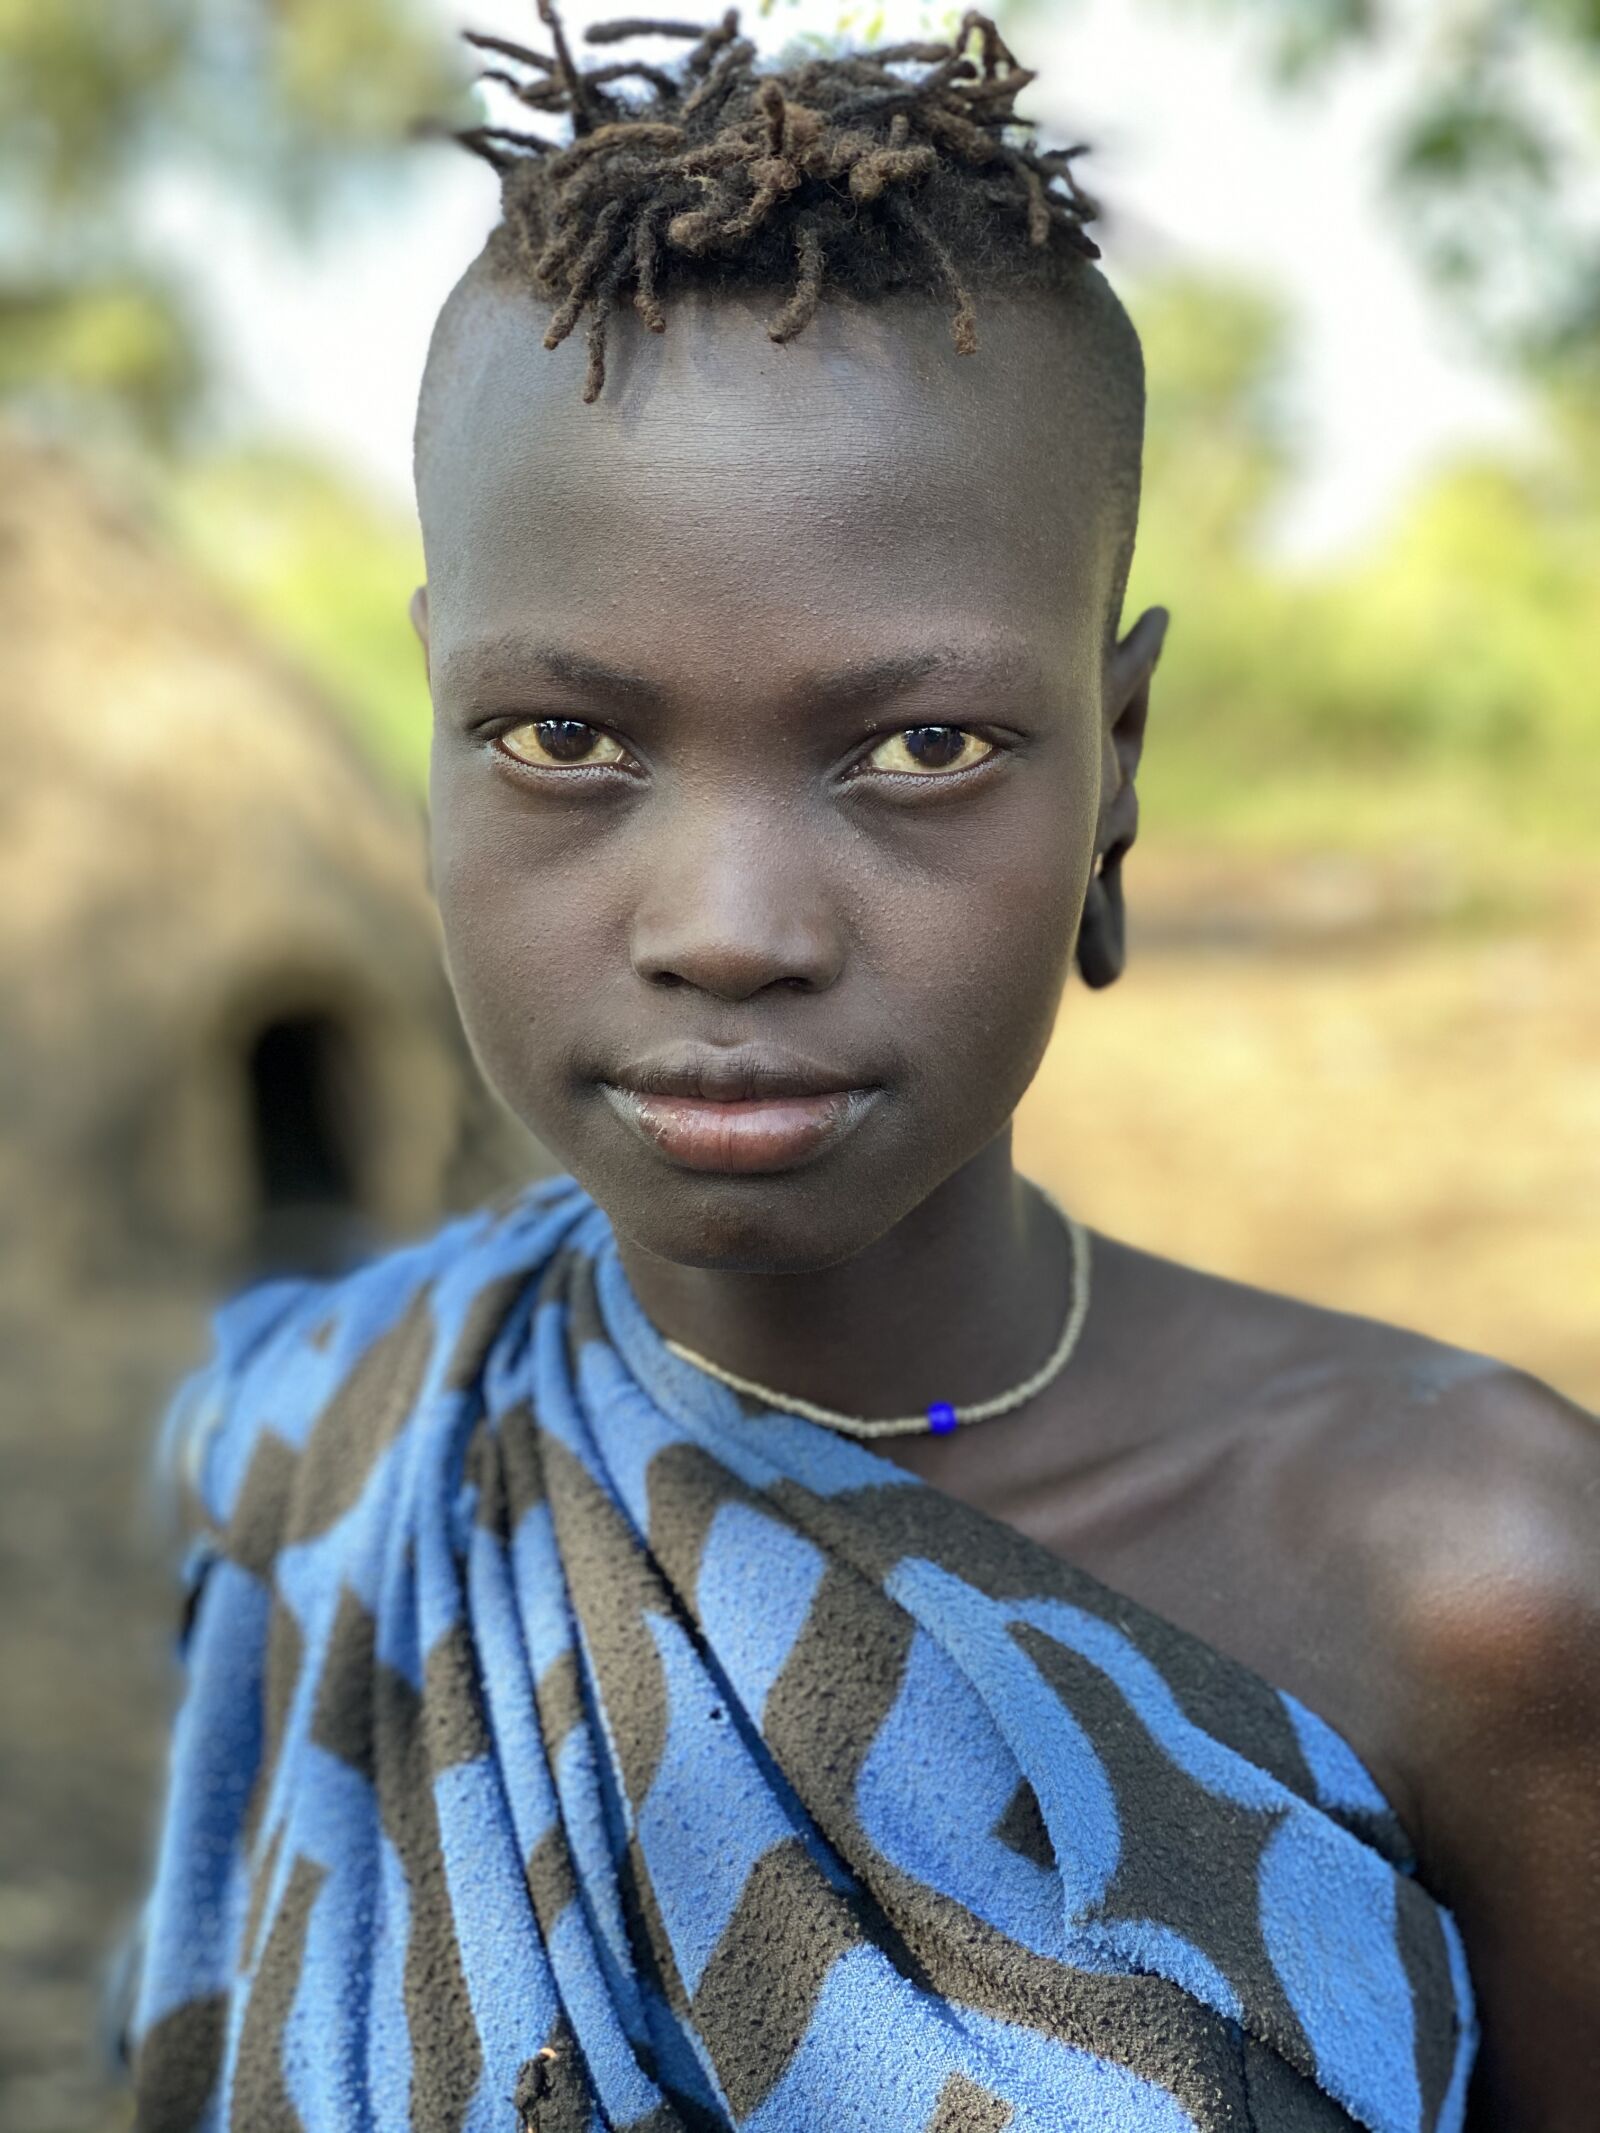 Apple iPhone 11 Pro + iPhone 11 Pro back dual camera 6mm f/2 sample photo. Omo, valley, ethiopia photography